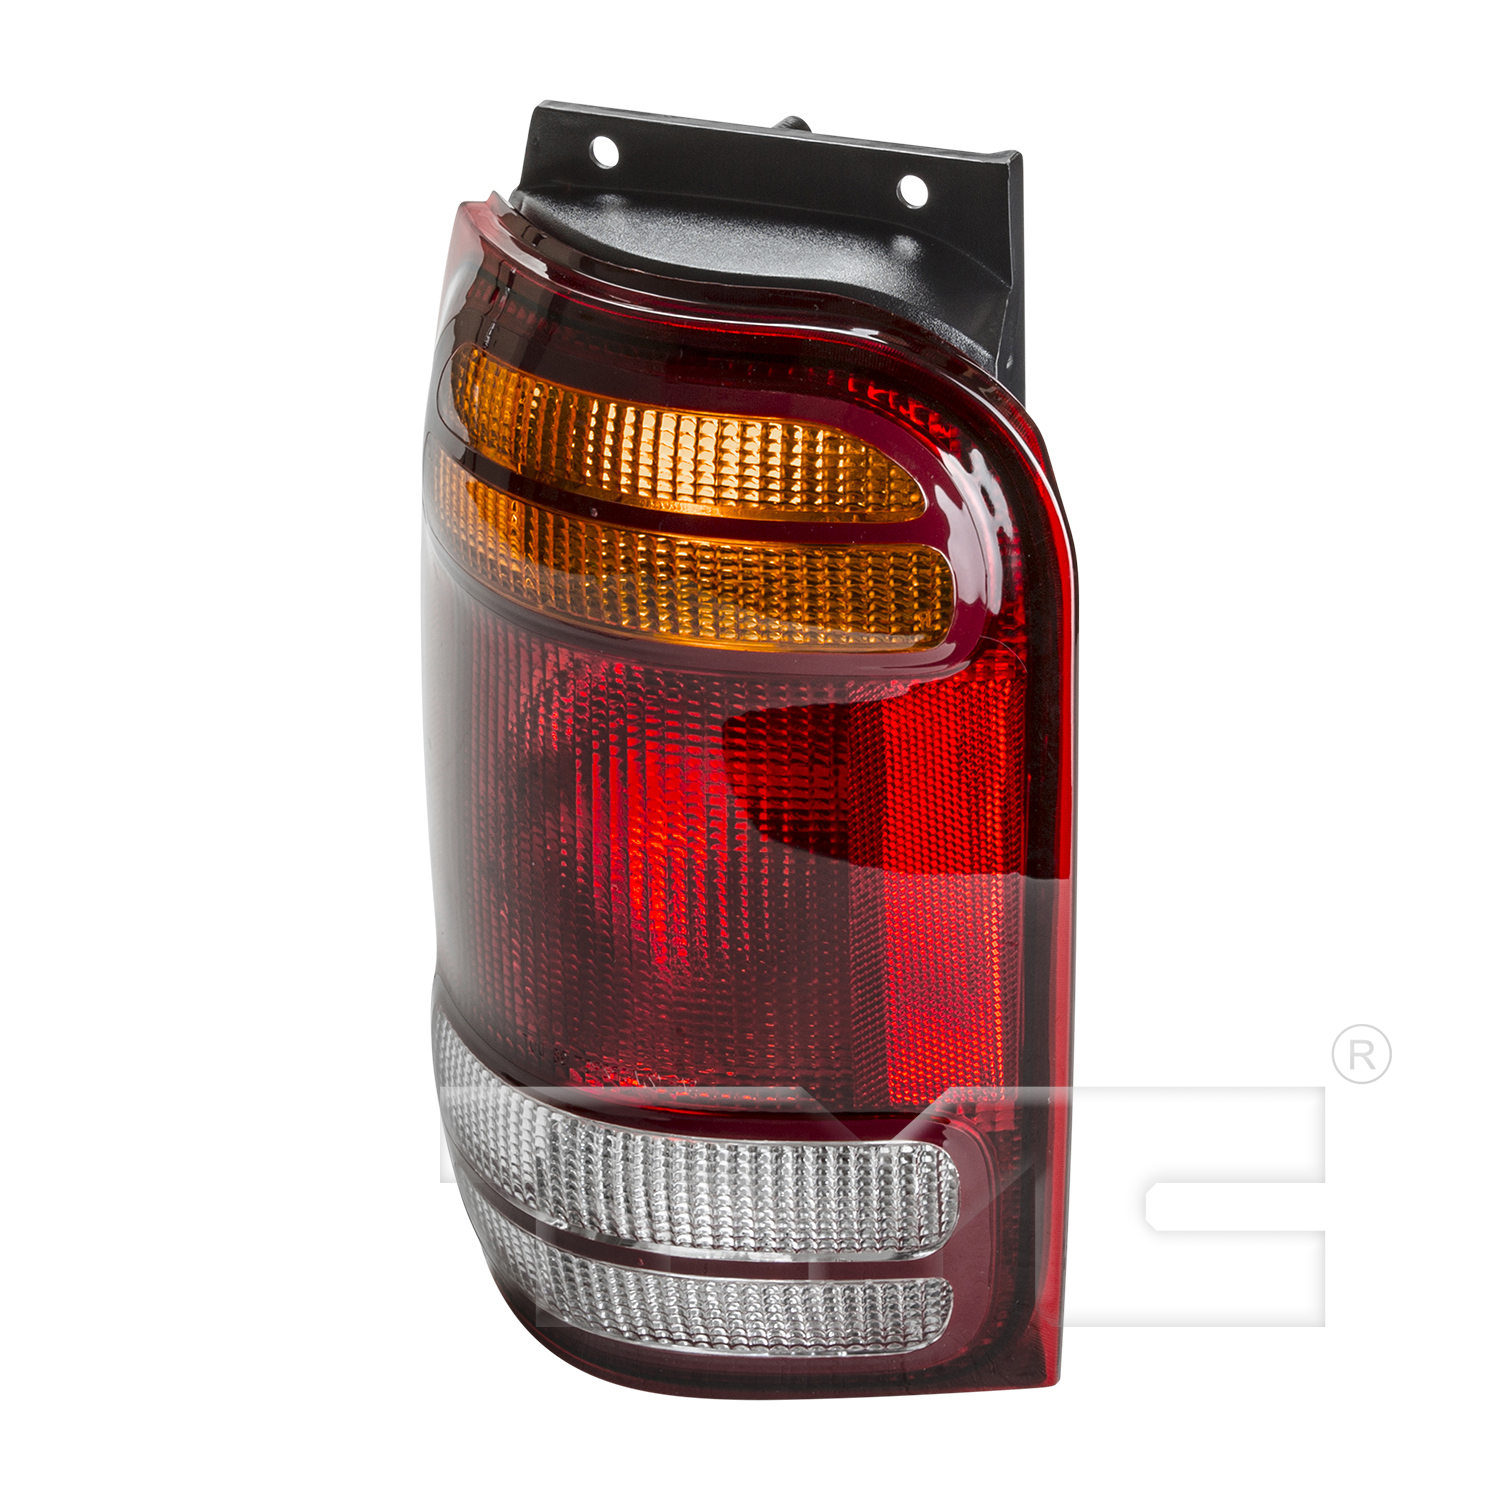 Aftermarket TAILLIGHTS for FORD - EXPLORER, EXPLORER,01-01,LT Taillamp assy